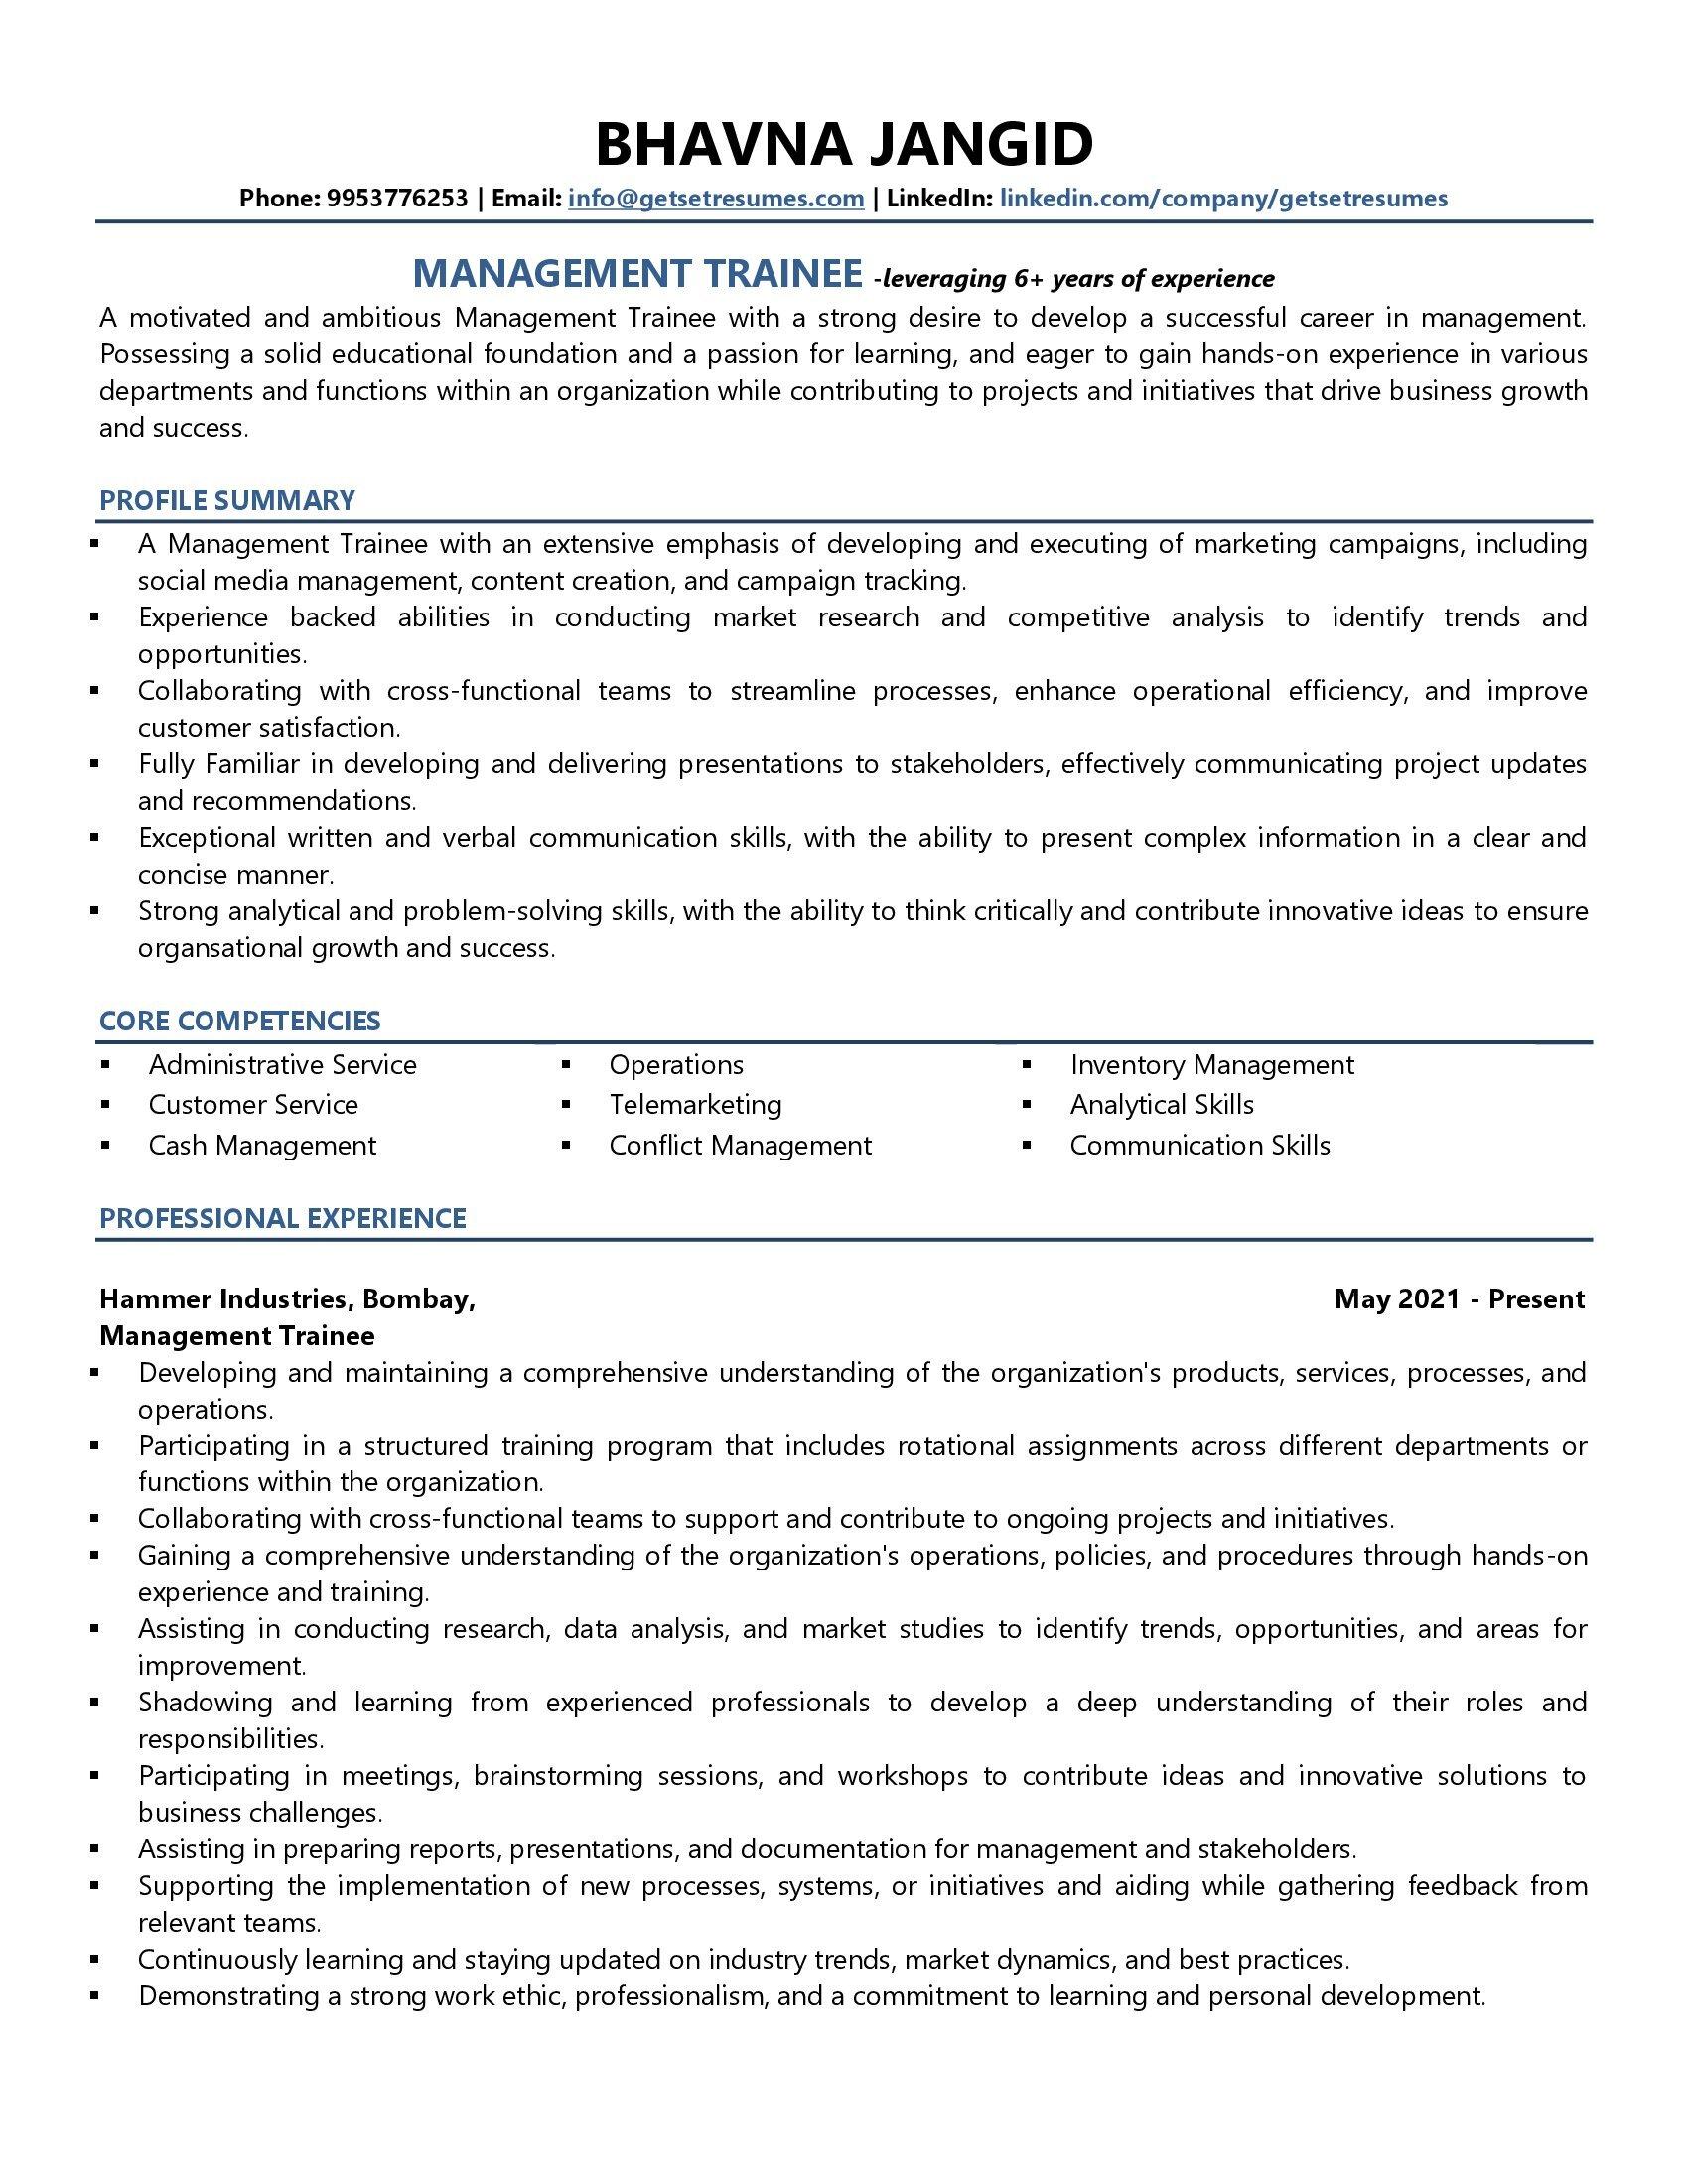 Management Trainees - Resume Example & Template